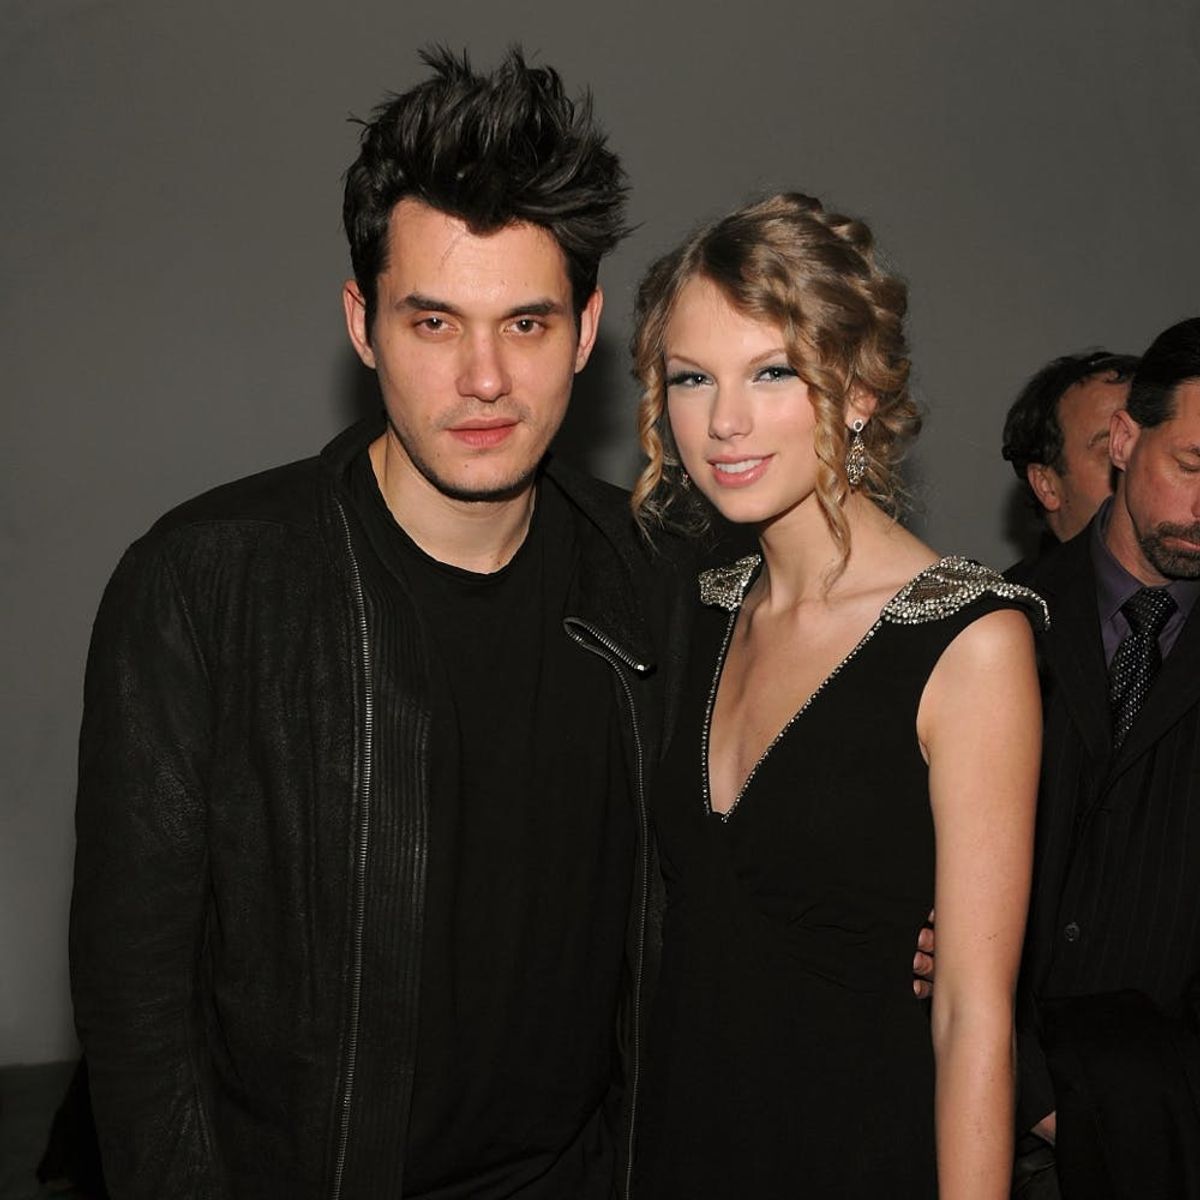 John Mayer Tweeted (and Deleted) Major Shade at Ex Taylor Swift on Her Birthday